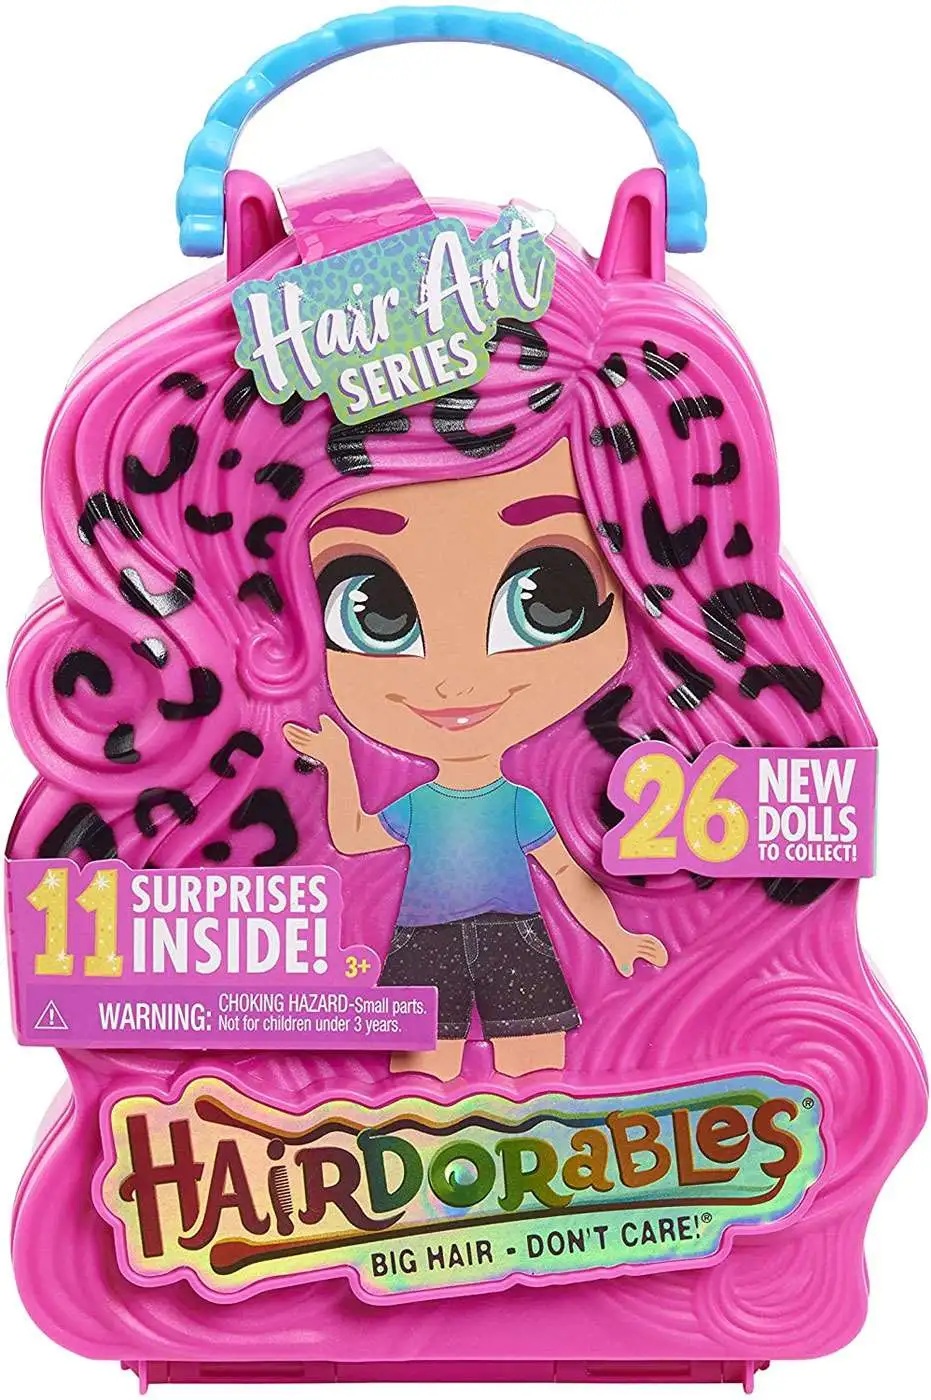 Series 5 Hairdorables Collectible Dolls Hair Art styles may vary 